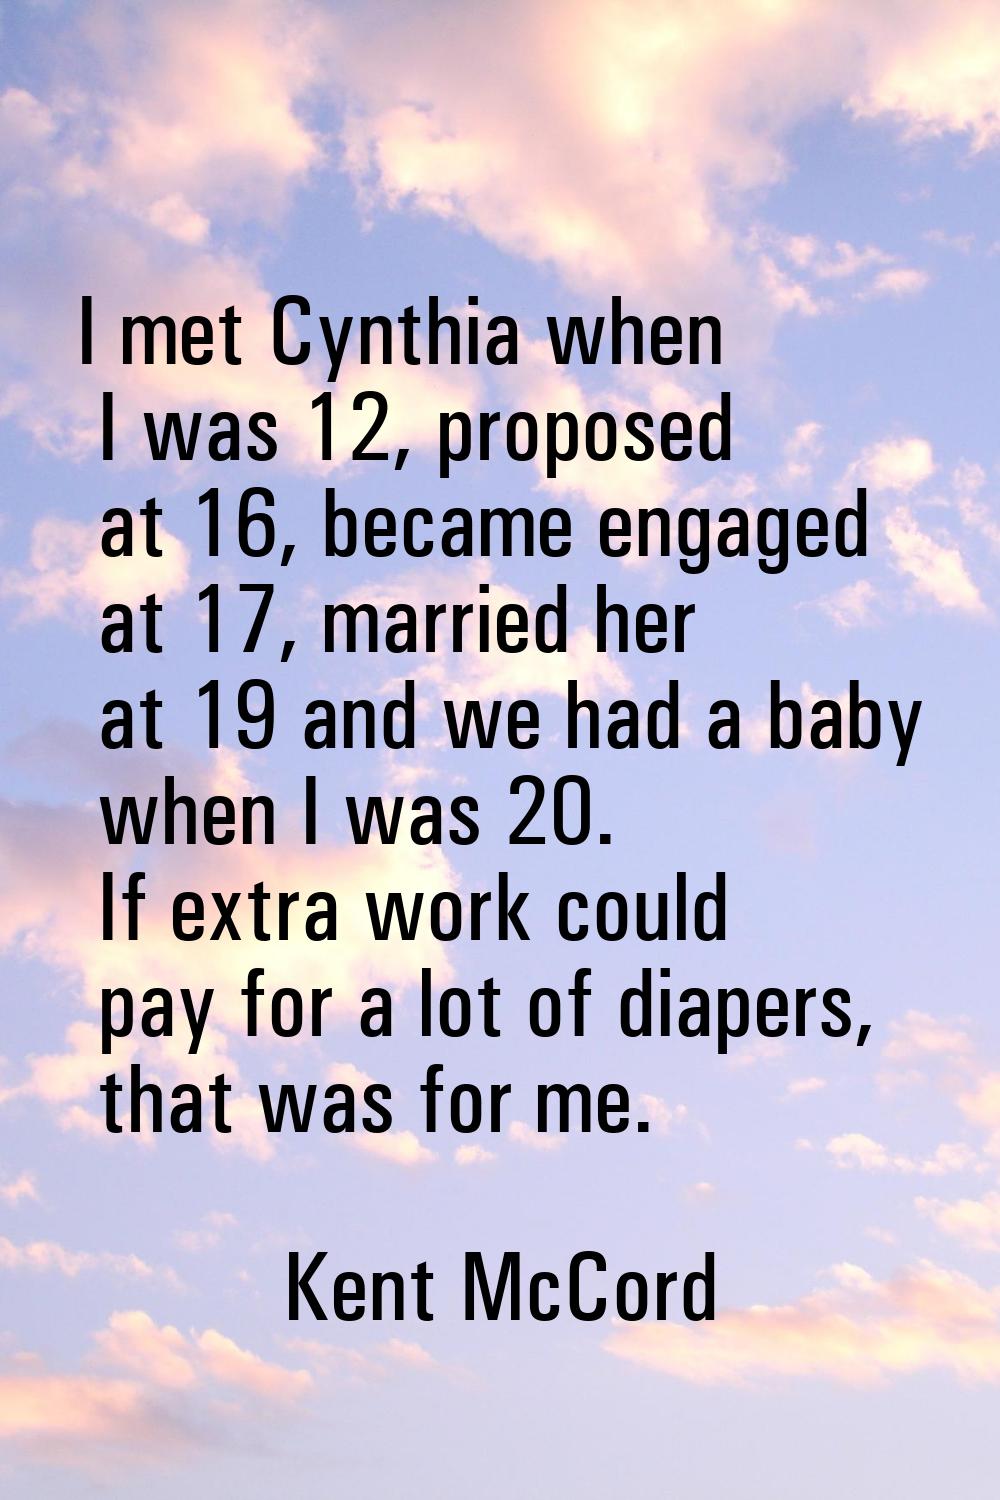 I met Cynthia when I was 12, proposed at 16, became engaged at 17, married her at 19 and we had a b